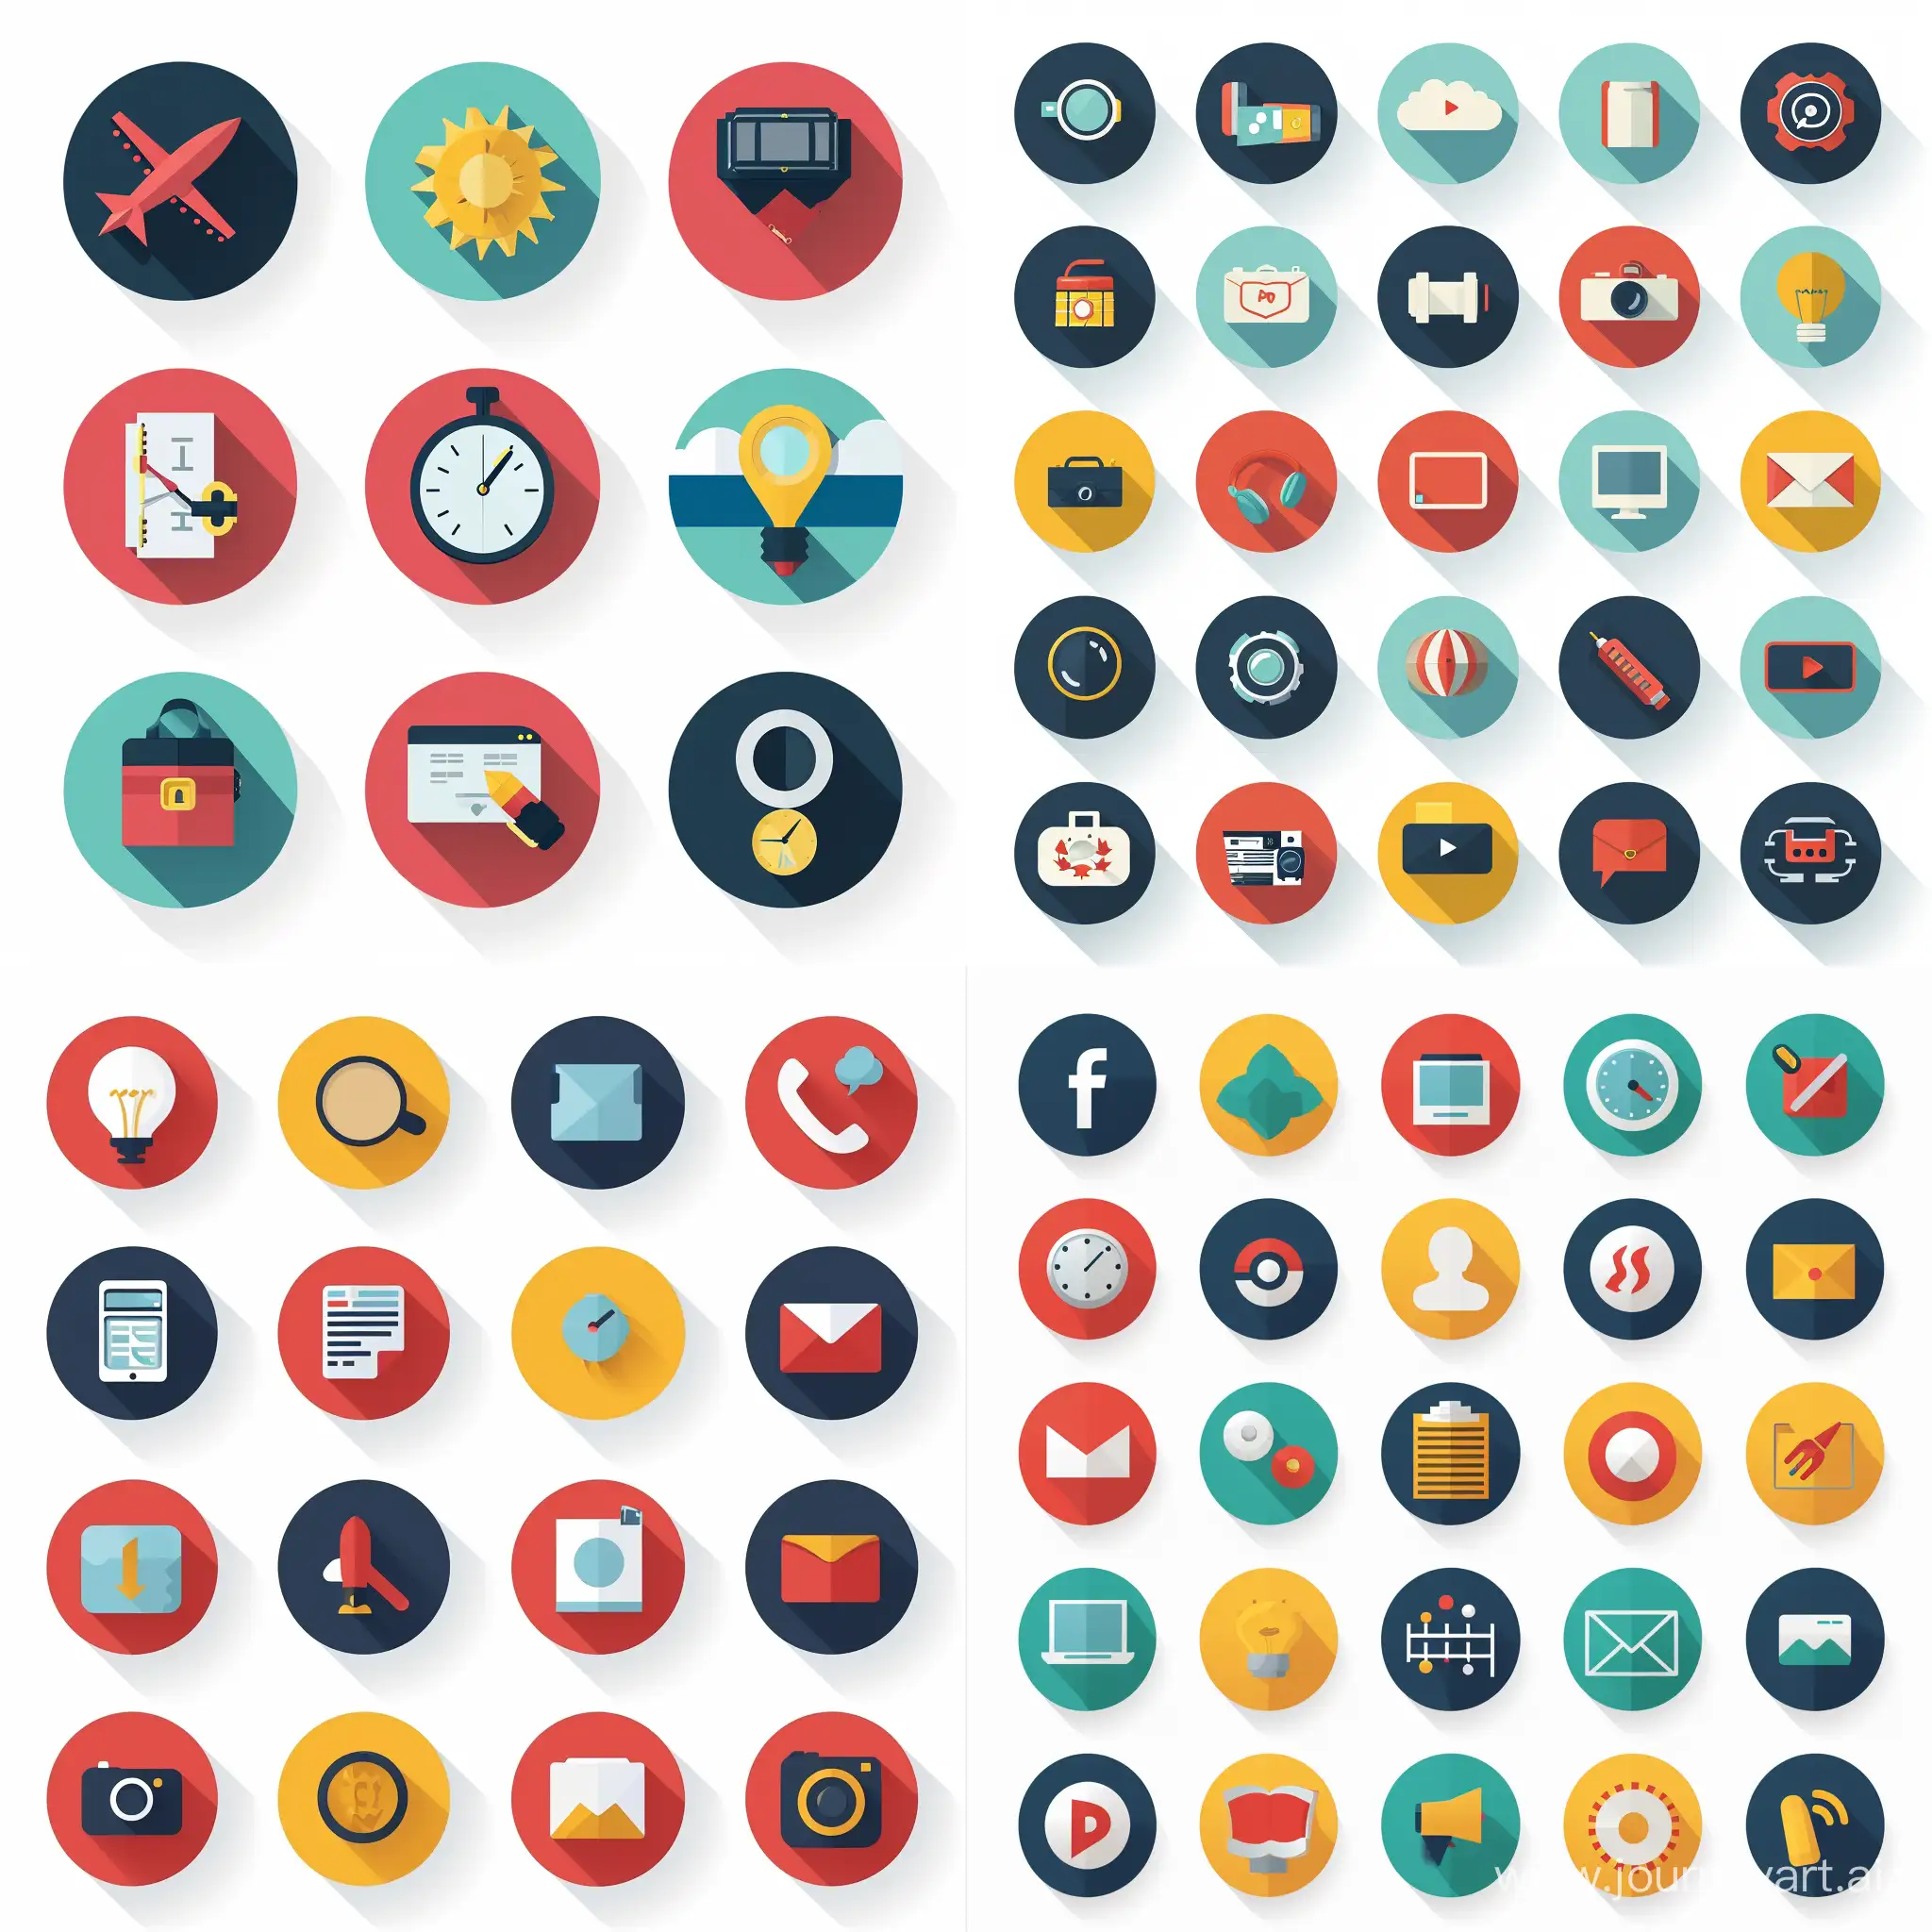 Flat-Icon-Designs-with-Versatile-Visual-Elements